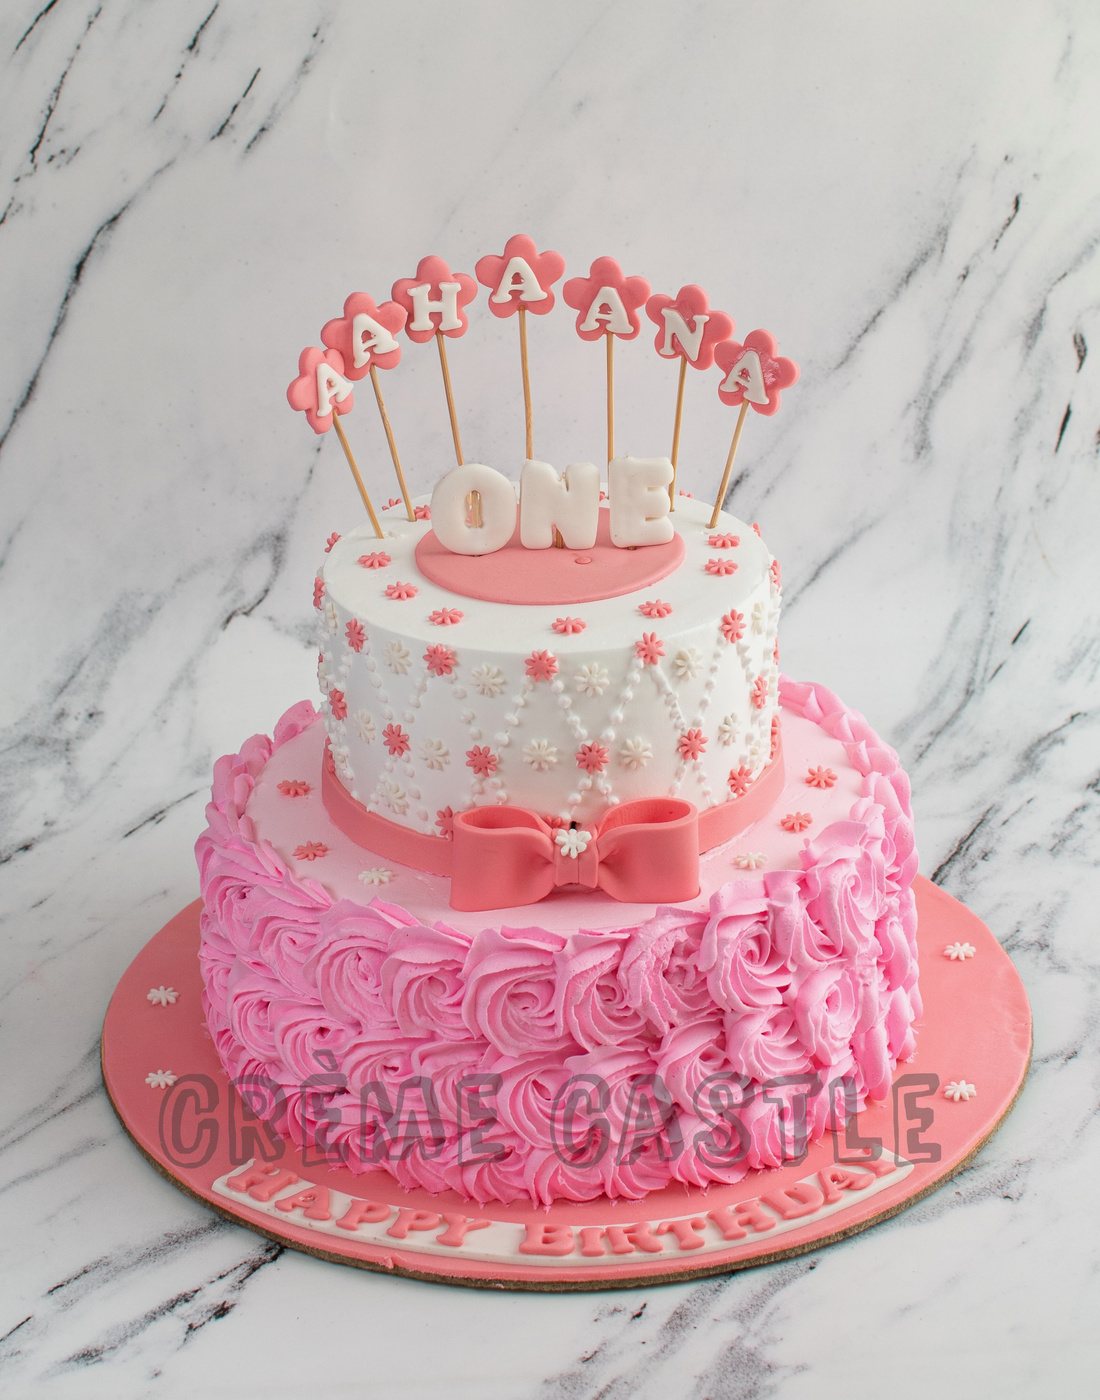 Blessed Beauty Cake-Pink | The Sugar Bakery